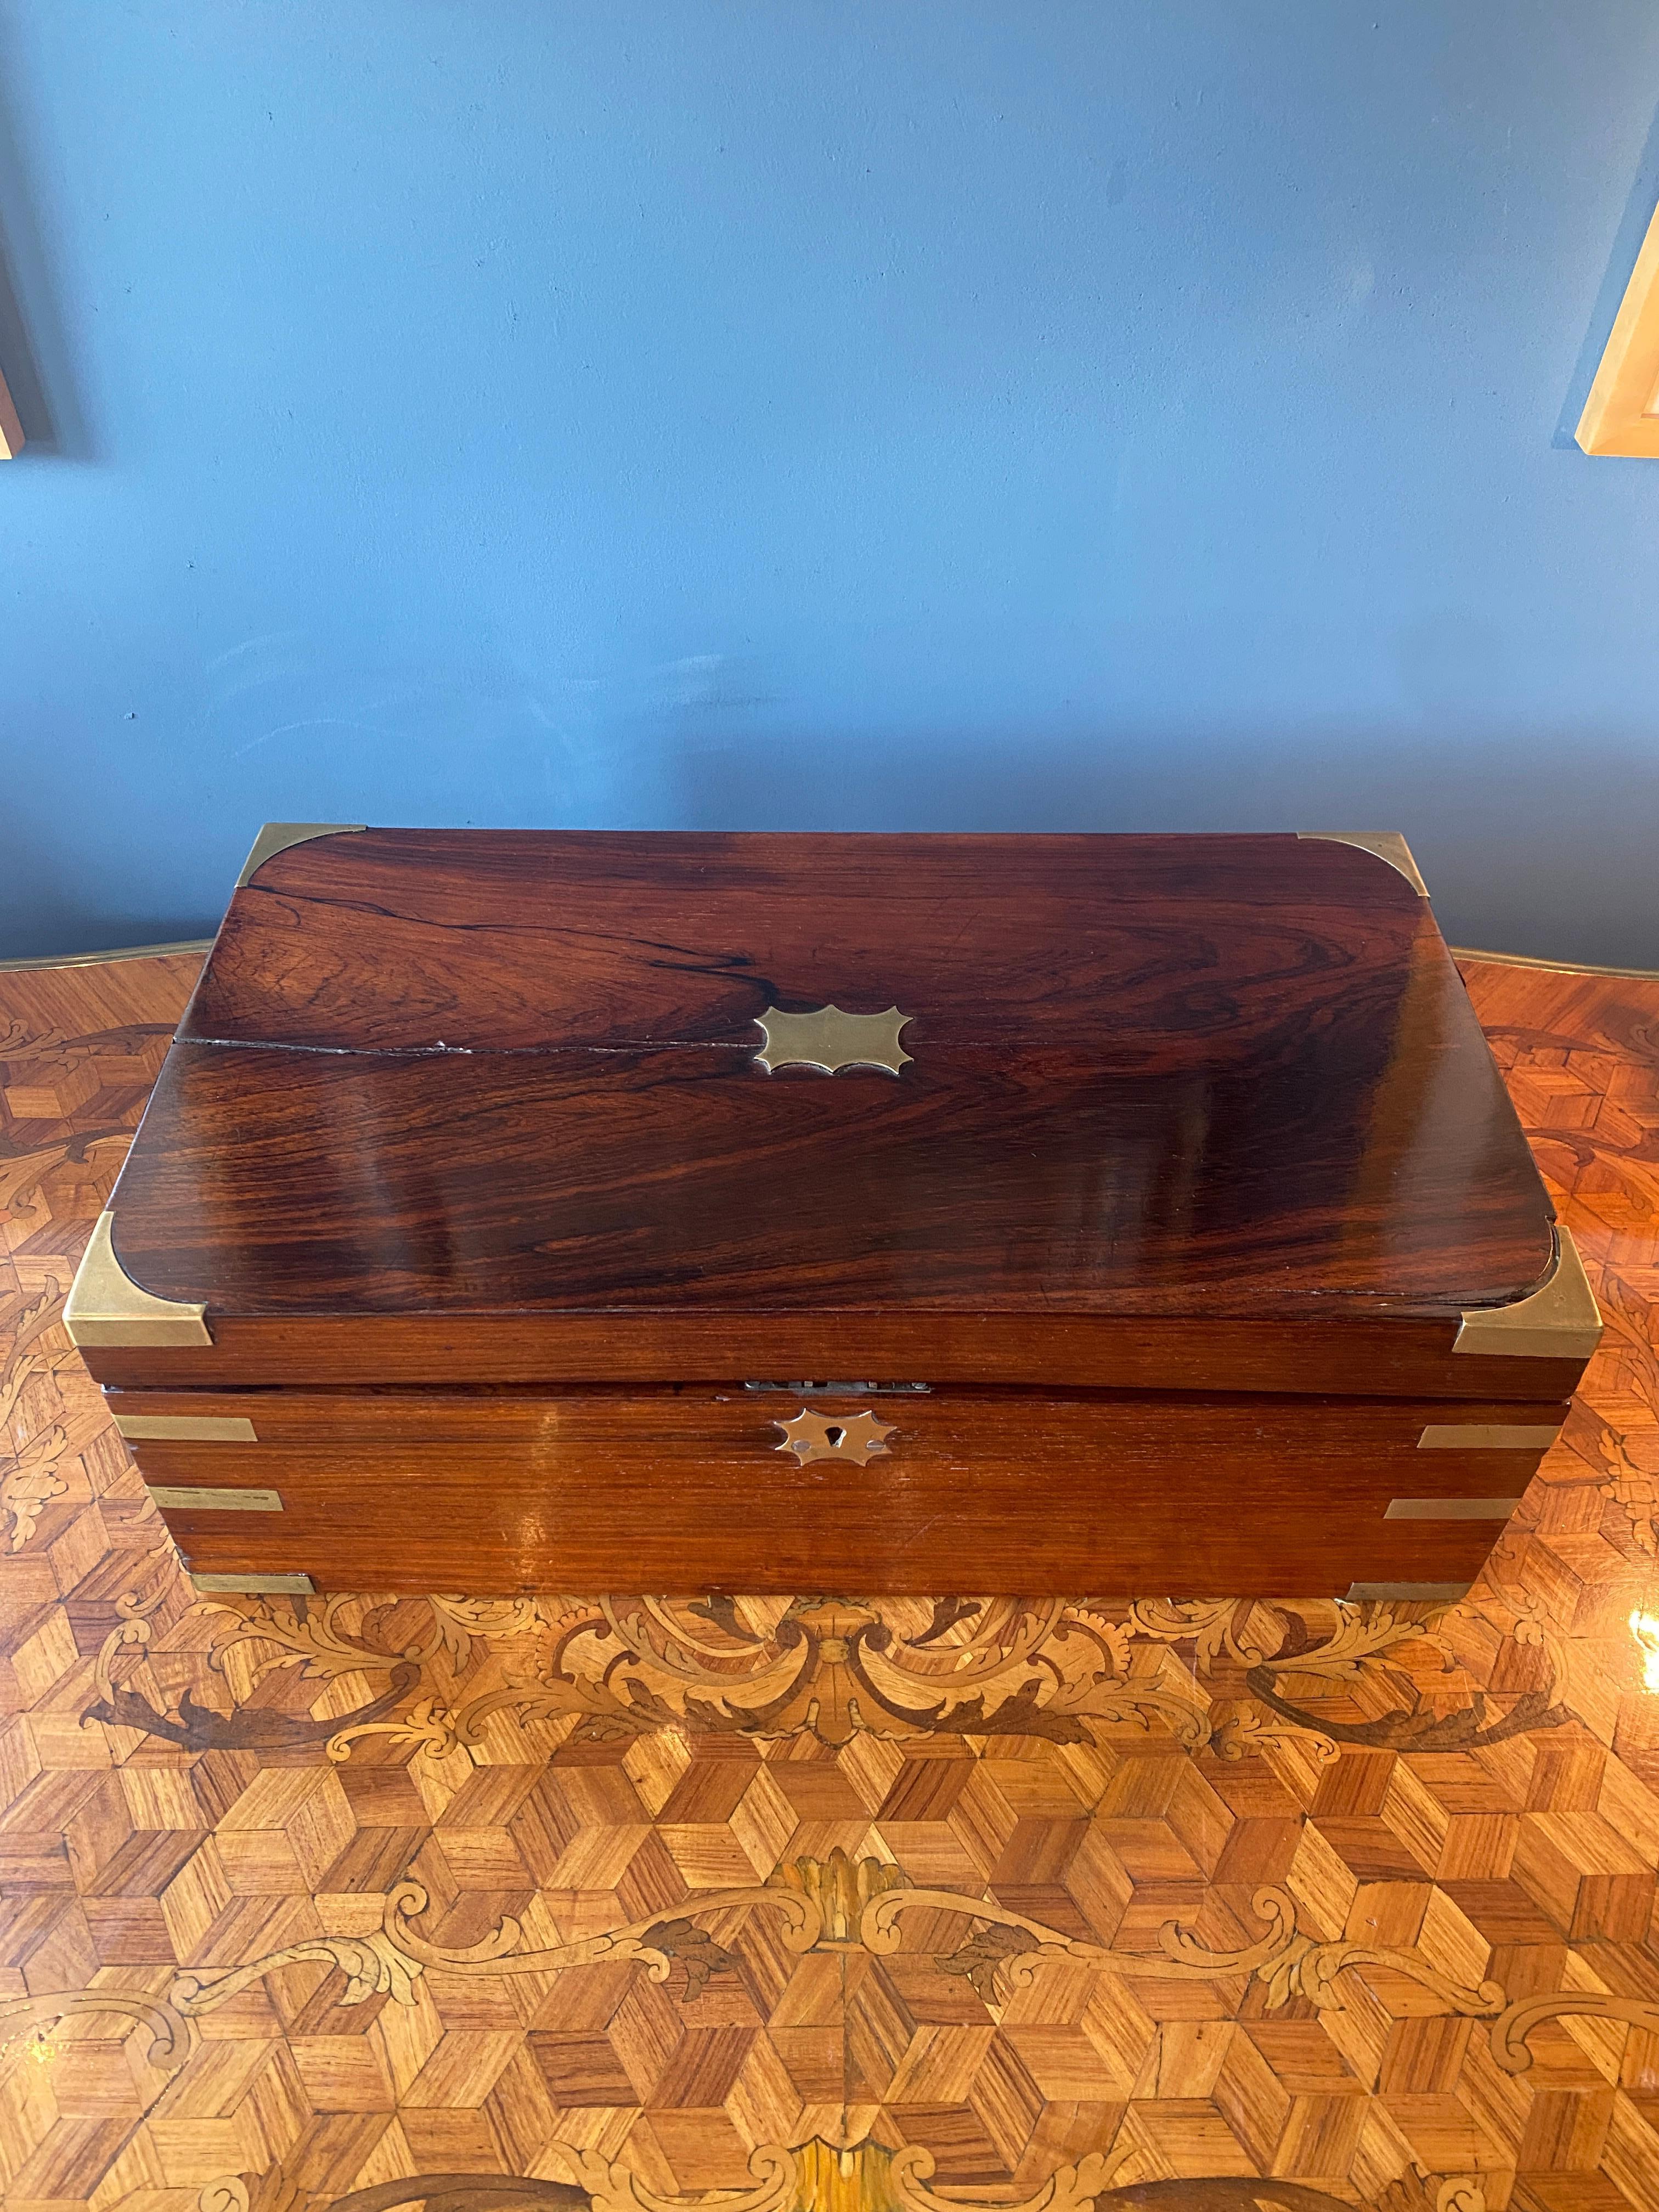 19th century rosewood English Campaign lap desk. Gorgeous highly polished rosewood and brass. Two hidden drawers fitted inside. Flip lid to open for two storage compartments. One side drawer with a locking brass pin. The writing surface is olive